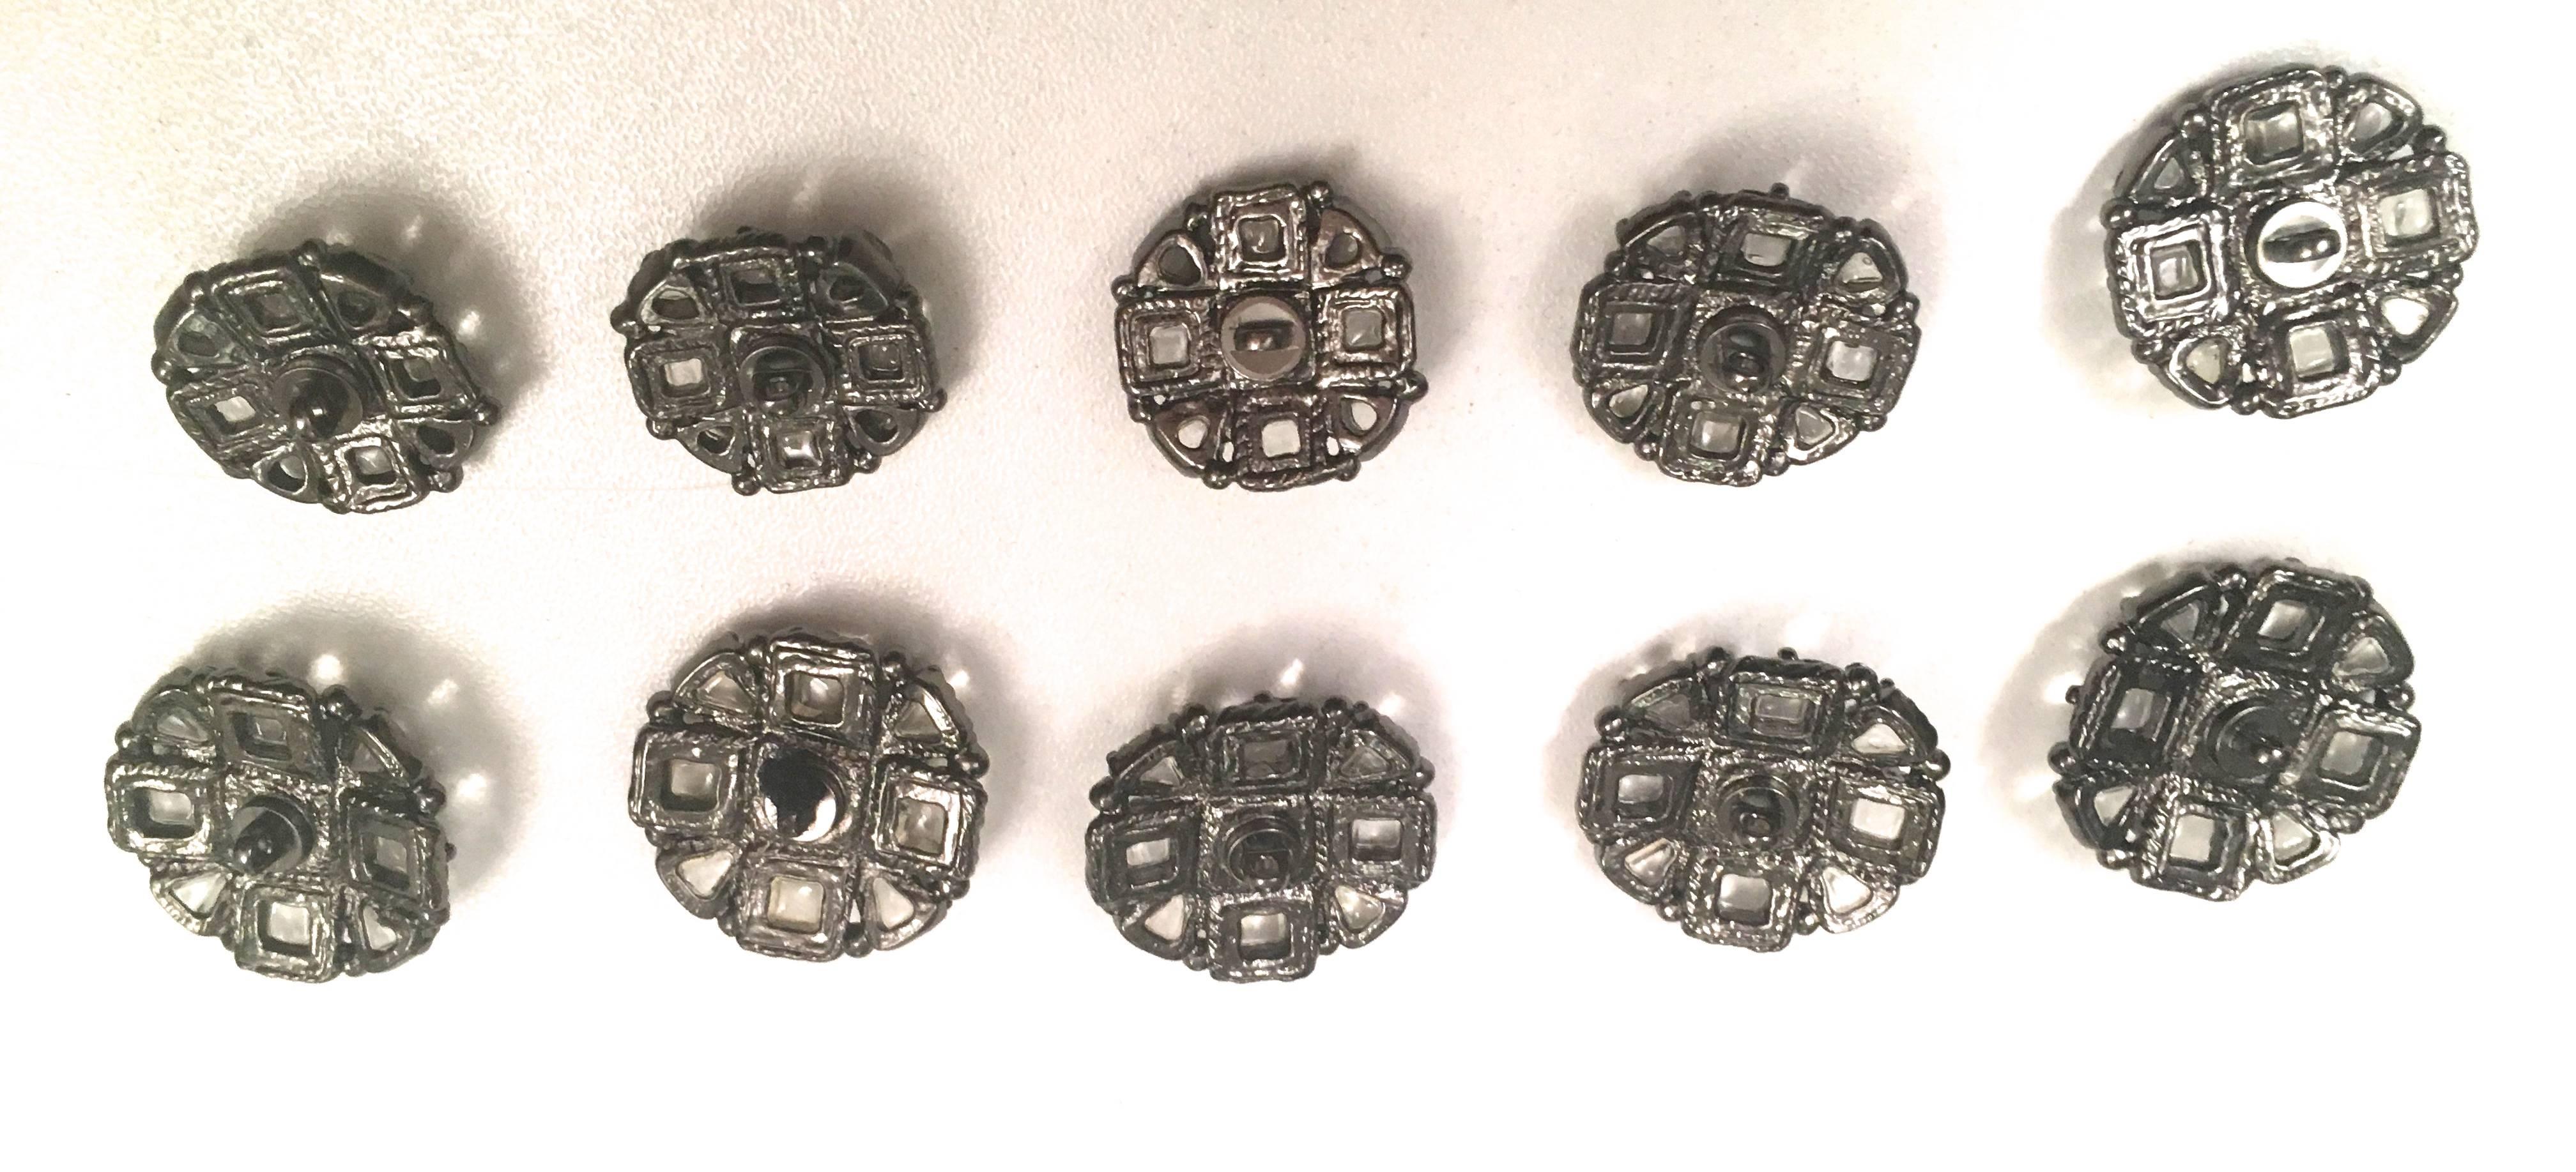 Chanel Buttons - Matching Set of 10 - Gripoix Inlay In Excellent Condition For Sale In Boca Raton, FL